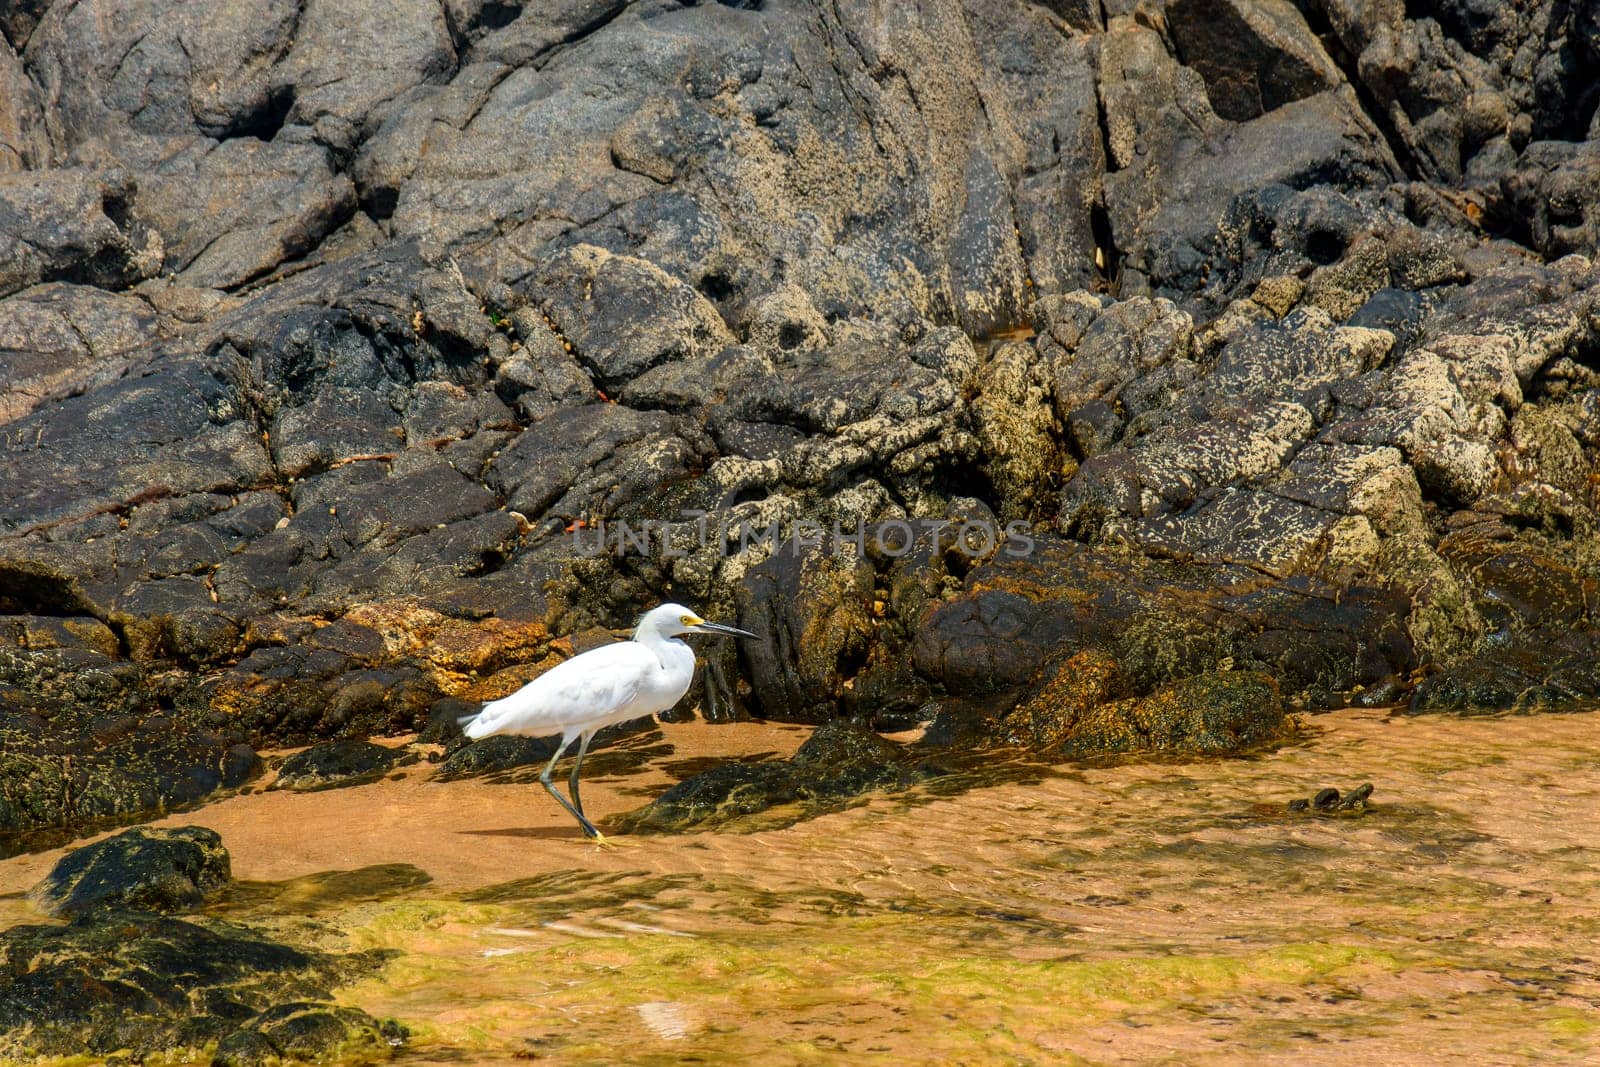 White egret walking in the water and among the rocks on a sunny day in Salvador, Bahia